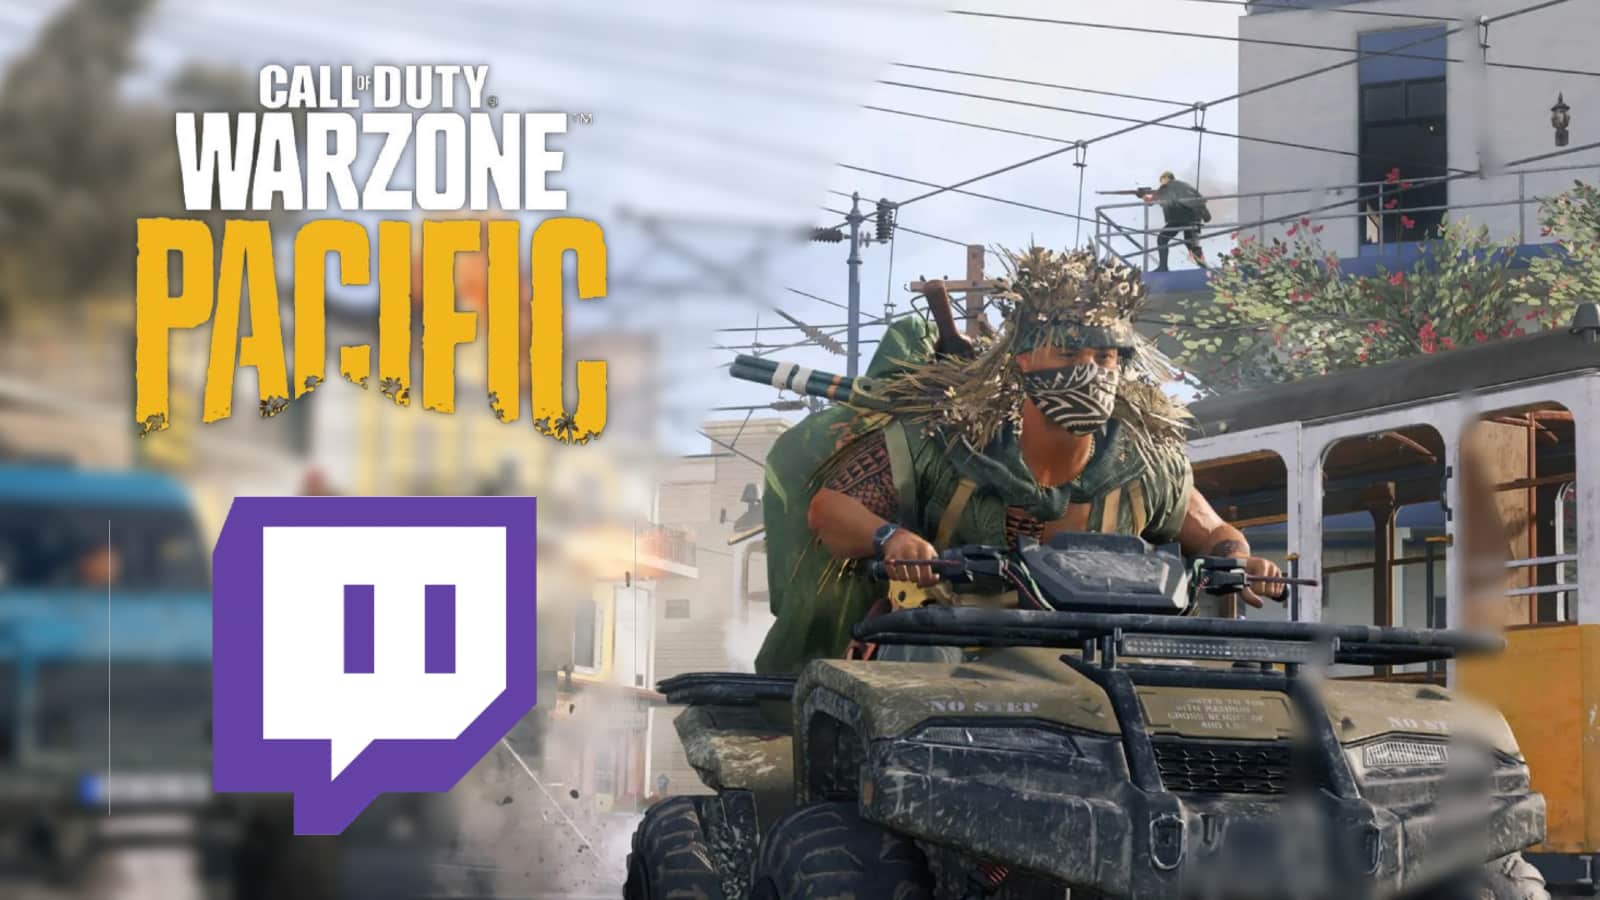 Warzone Pacific Season 1 is game’s least viewed ever on Twitch